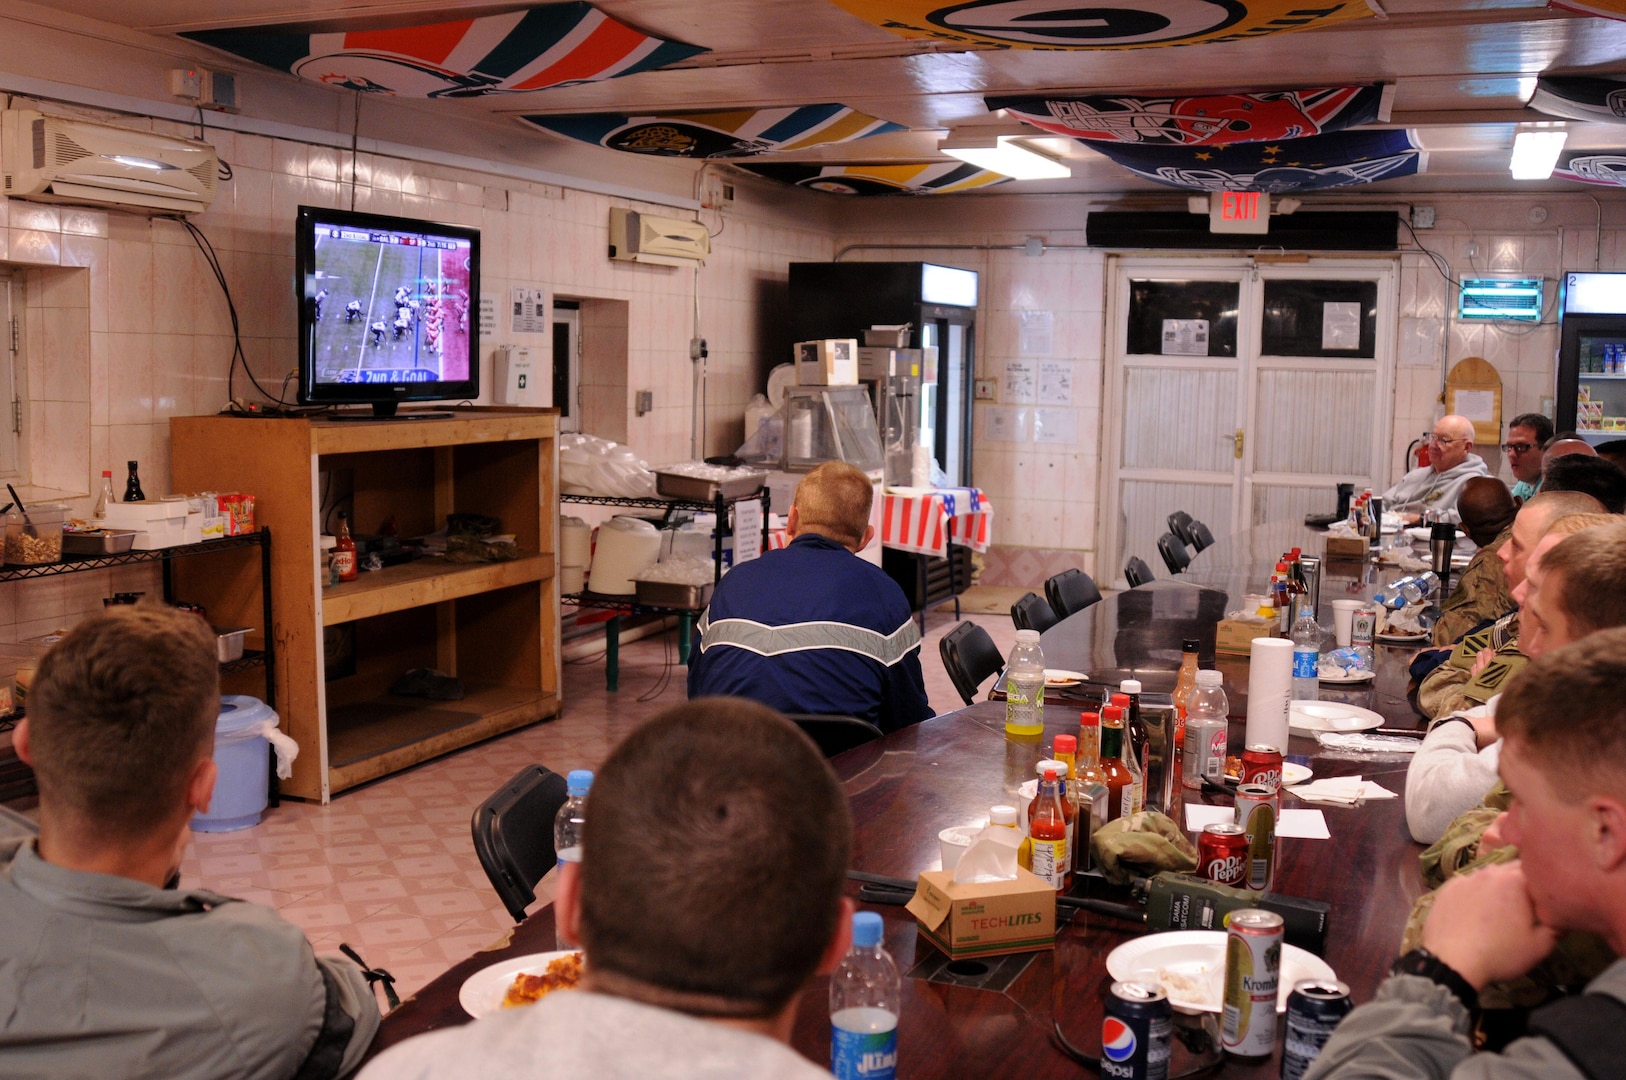 Members of Zabul Provincial Reconstruction Team watch Super Bowl XLVII at Forward Operating Base Smart, Afghanistan, Feb. 4, 2013. DLA Troop Support’s Subsistence supply chain helped ensure service members enjoy traditional fare for this year’s big game.